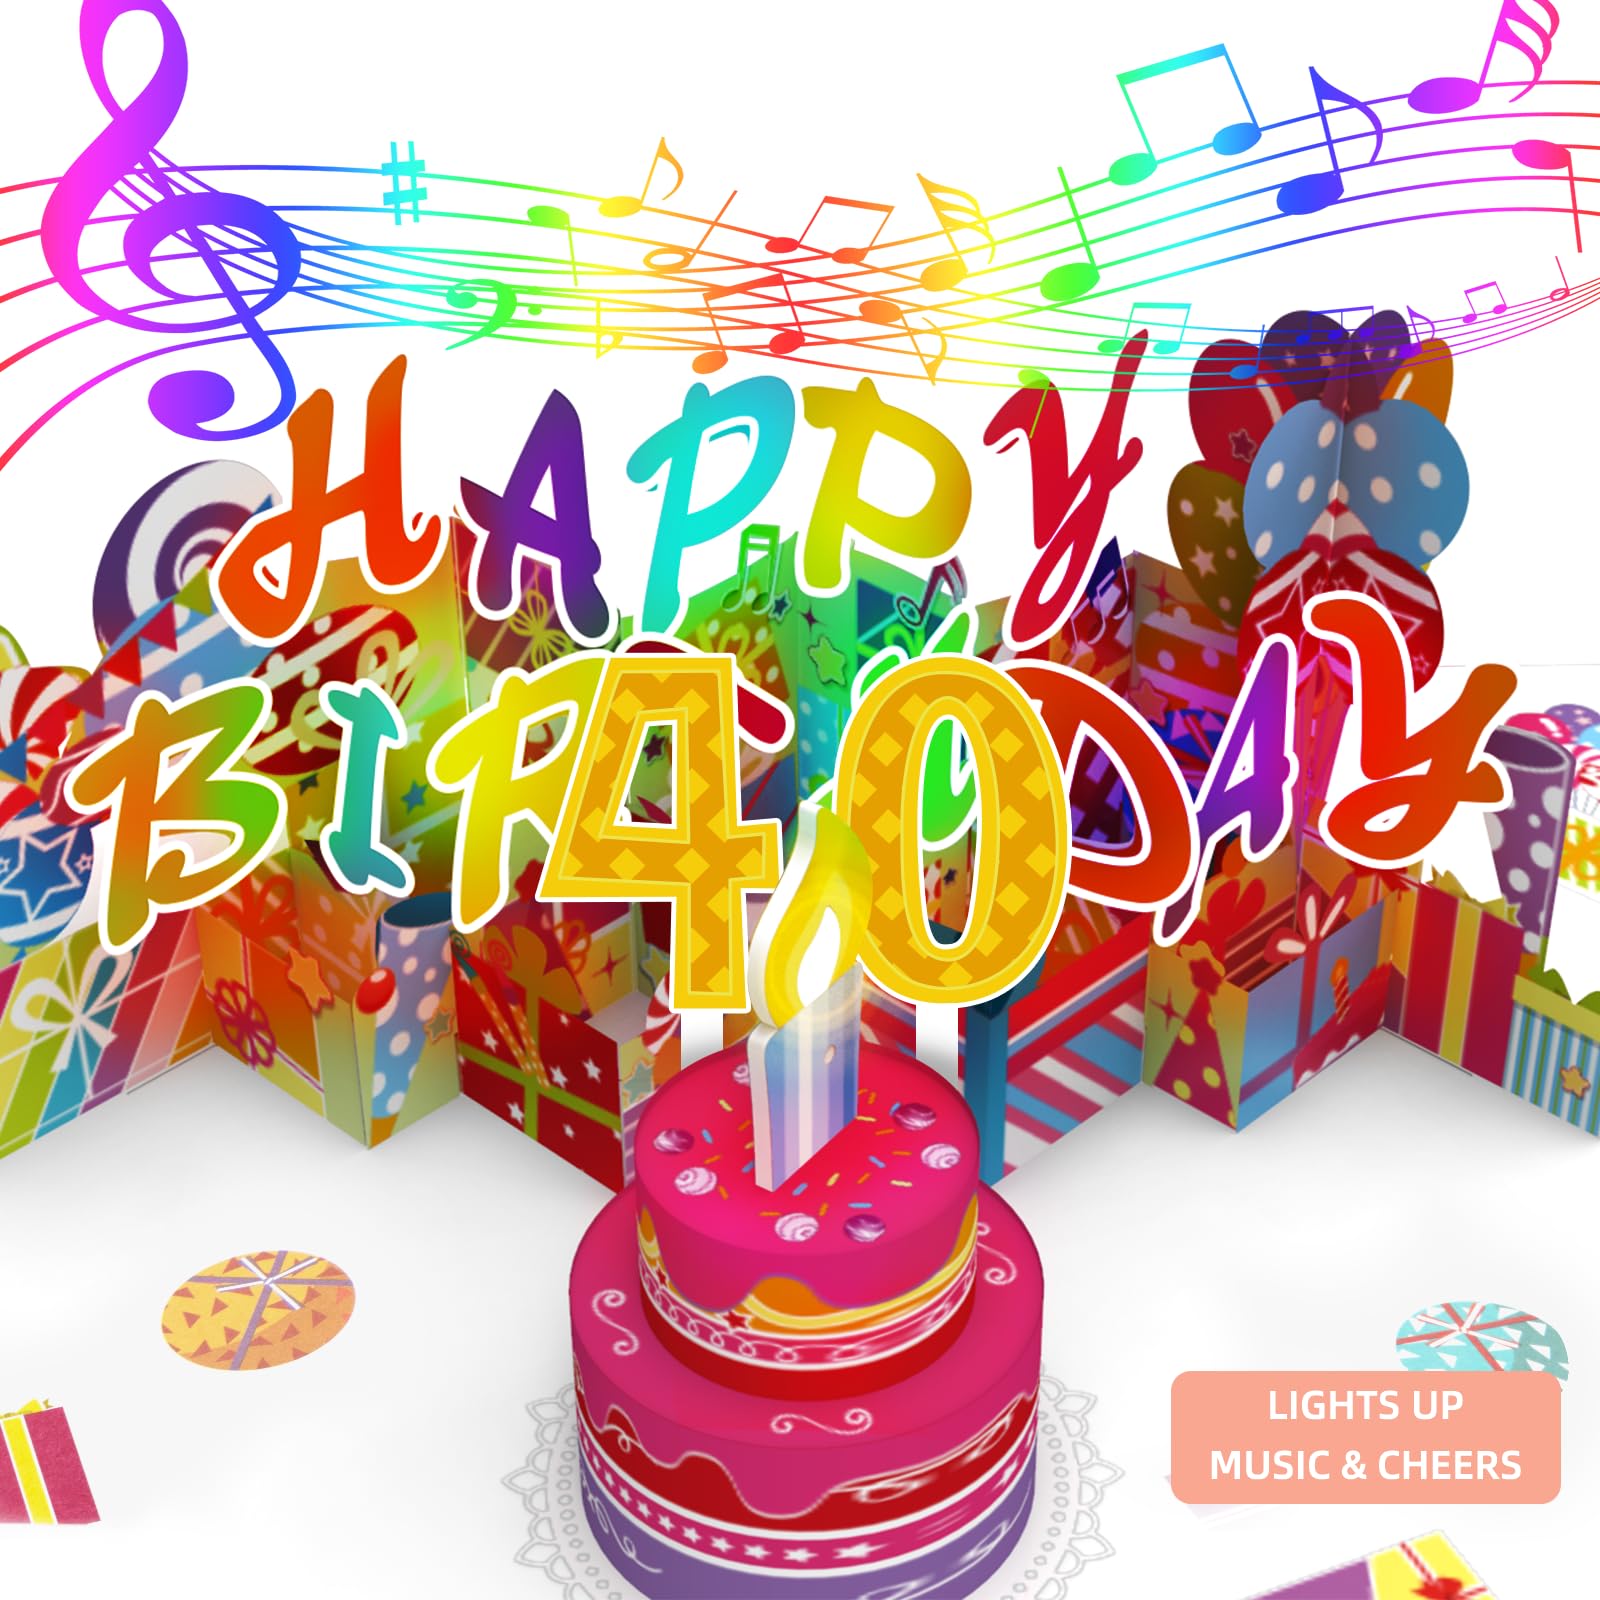 Gumry 40TH Musical Birthday PopUp Card, Blowable LED Light Candle 3D Cards with Song 'HAPPY', Applause Cheers Sound,Color-Changi